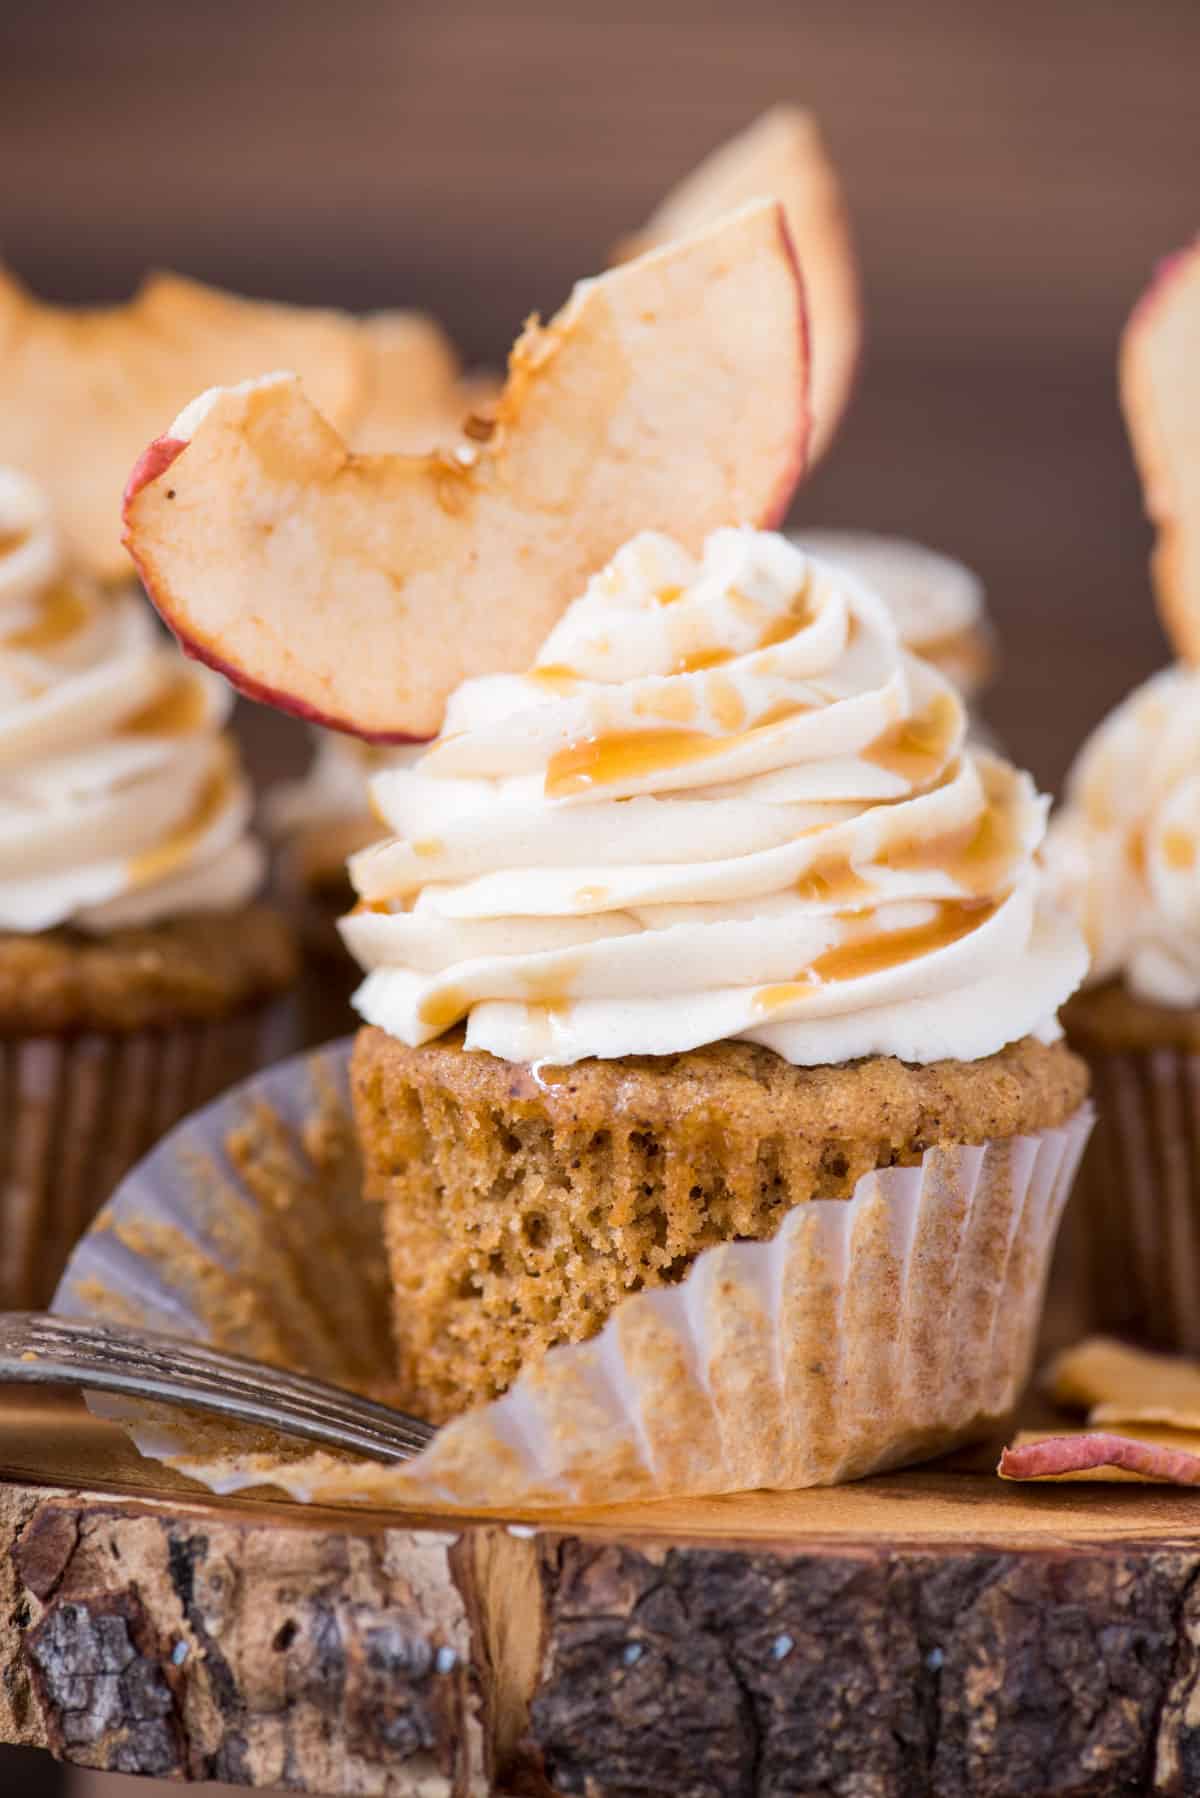 apple spice cupcake with caramel frosting and apple chip on wood cake stand with wood background 